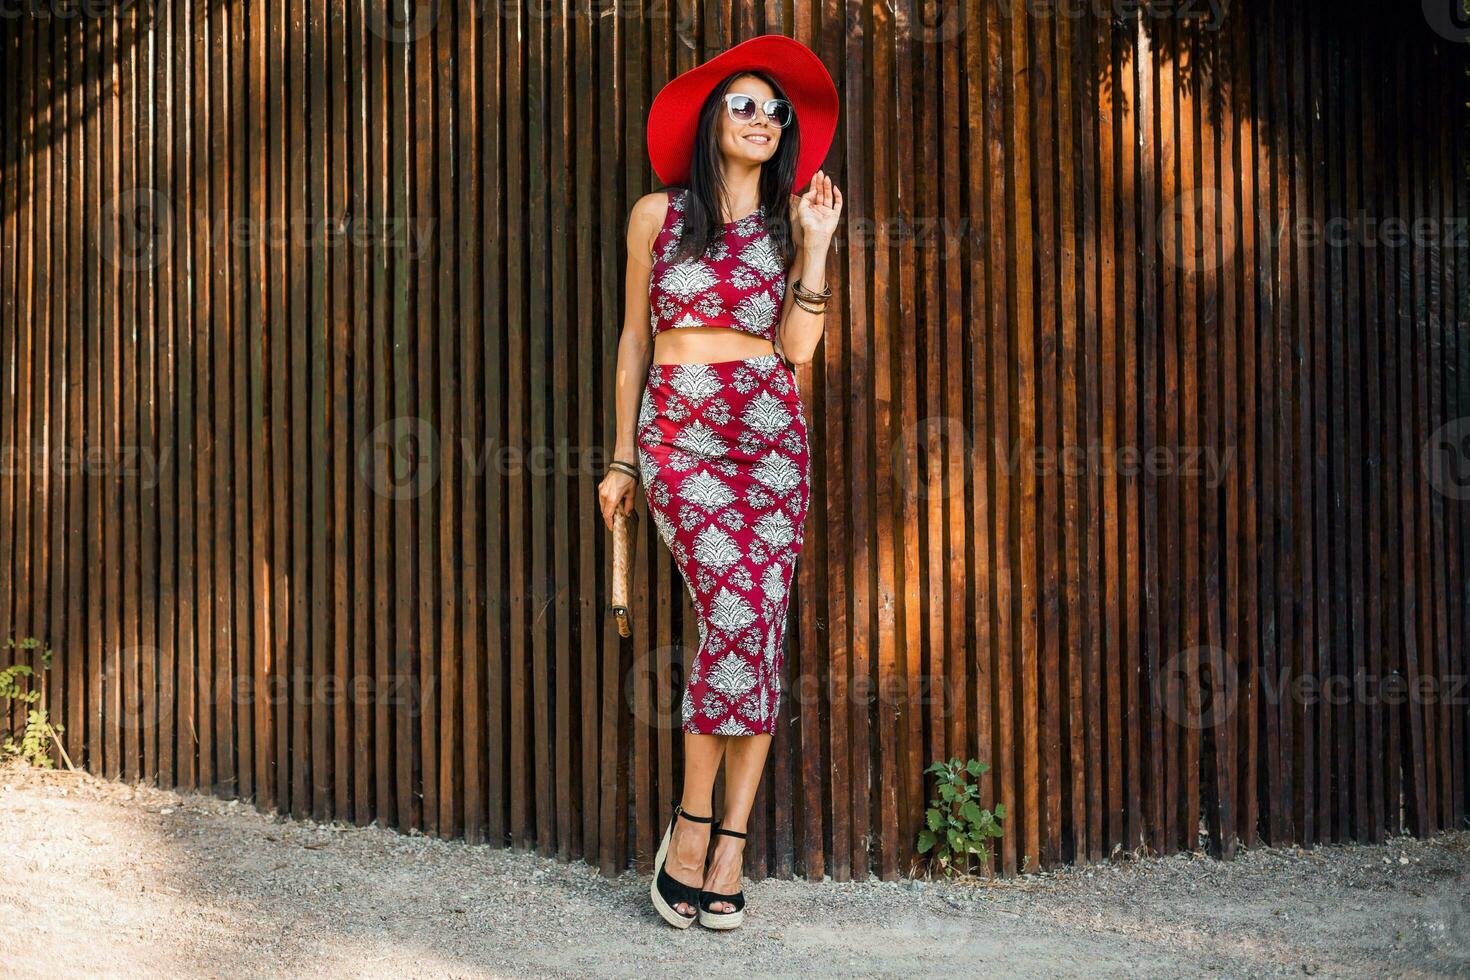 stylish beautiful woman in printed outfit, summer style fashion photo